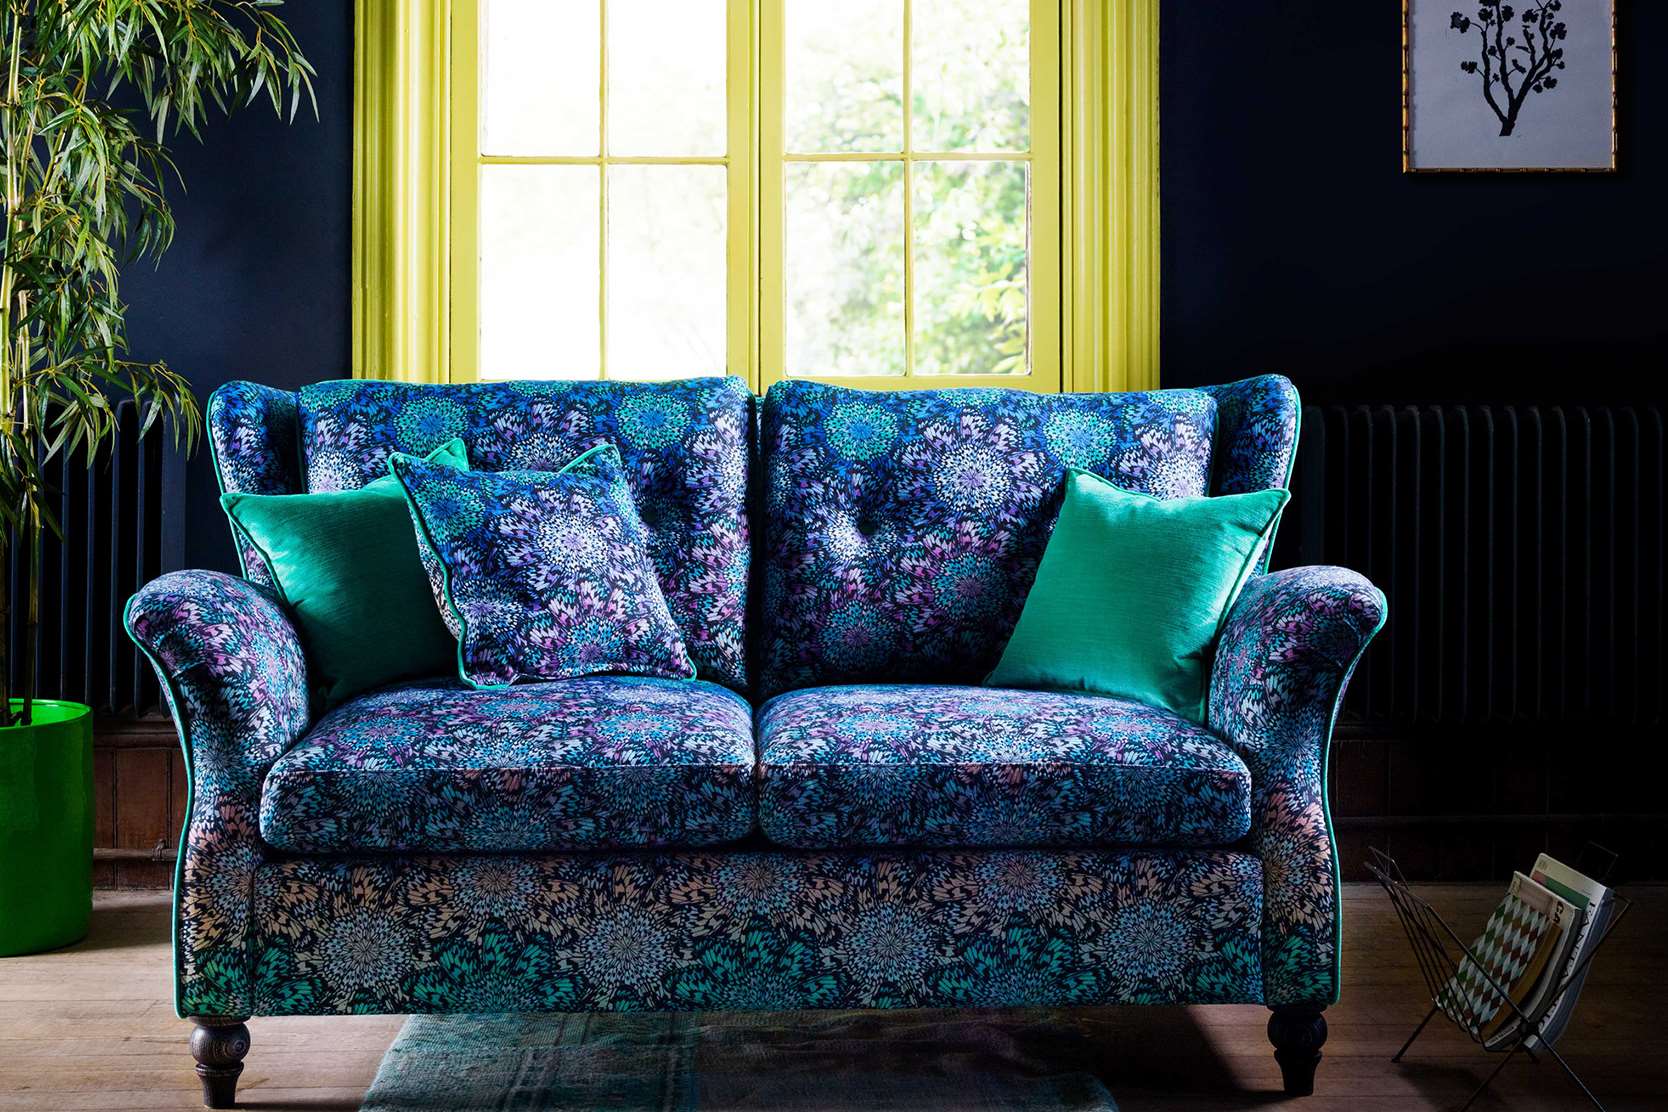 A new modern classic, Kemp offers a range of sophisticated sofas and chairs that nod to mid-century design and refuse to compromise on comfort. The option to feature contrast piping and buttoning bring the Kemp designs bang up to date